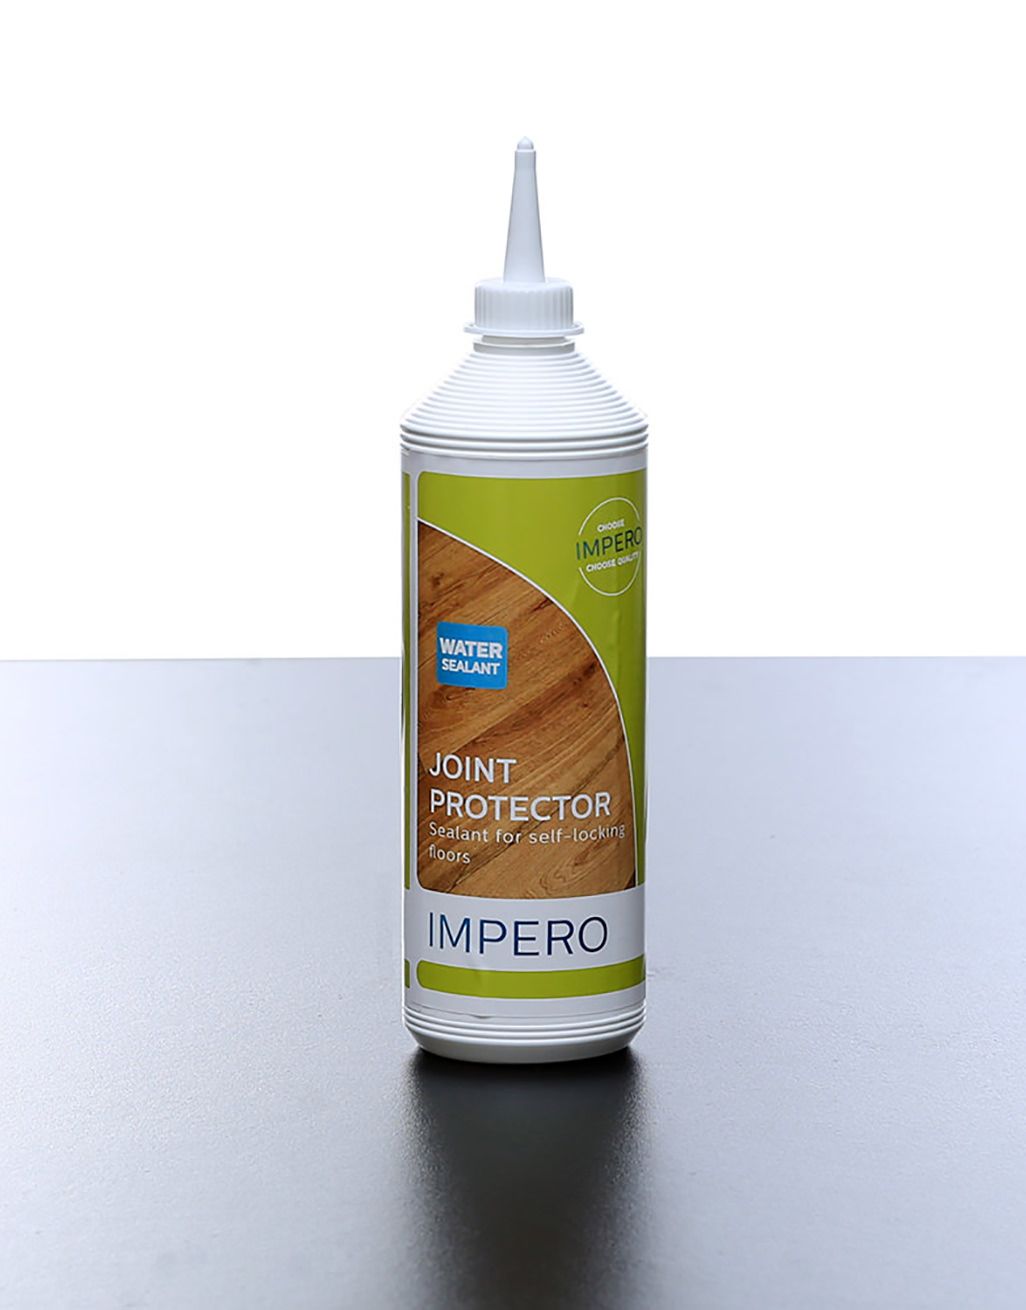 Impero Joint Protector Direct Wood, Laminate Flooring Joint Sealant